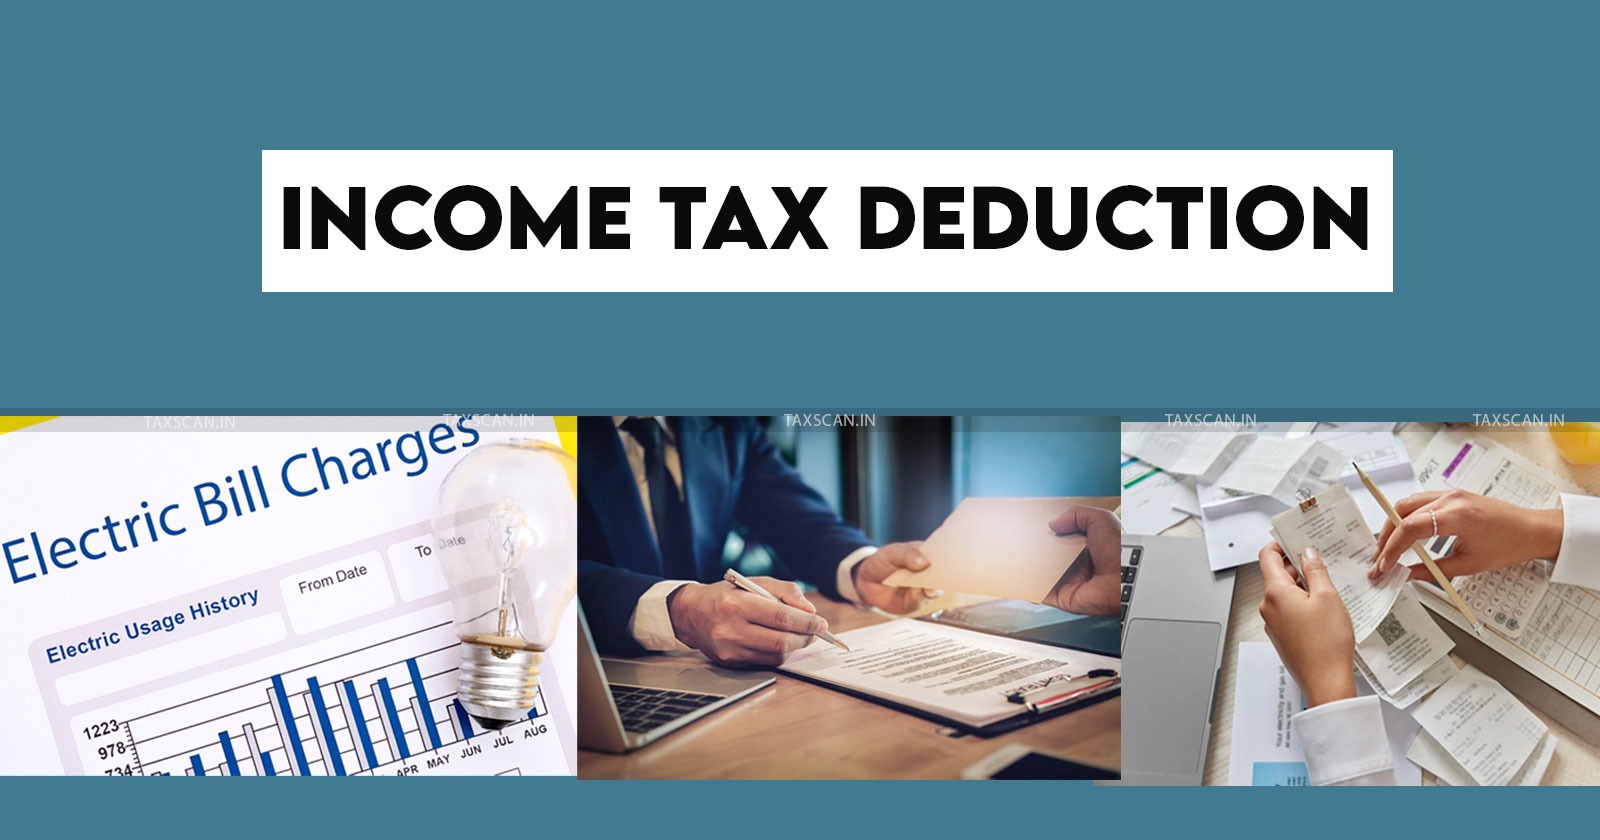 ITAT Mumbai - ITAT - Income Tax - Electricity Charges Deduction Tax - Audit Fees Deduction for Interest Income - Taxscan